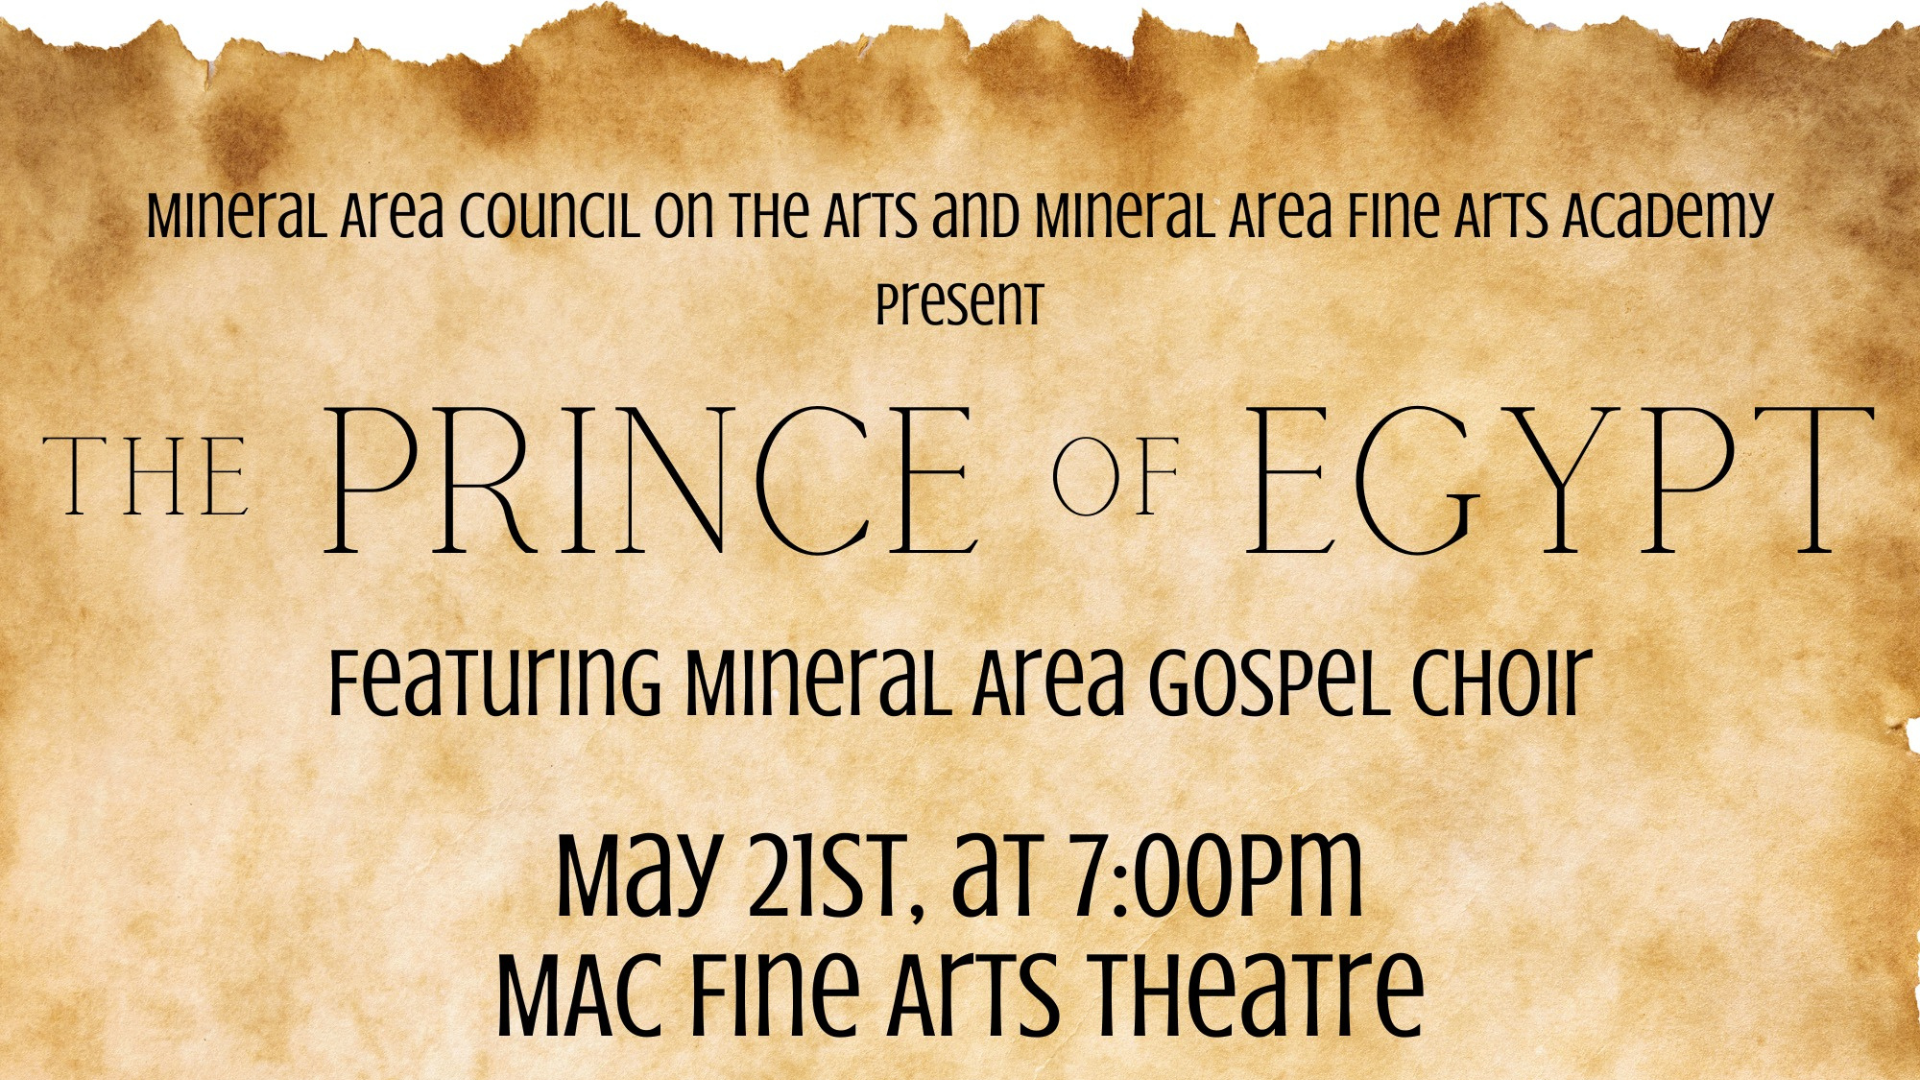 The Prince of Egypt at MAC